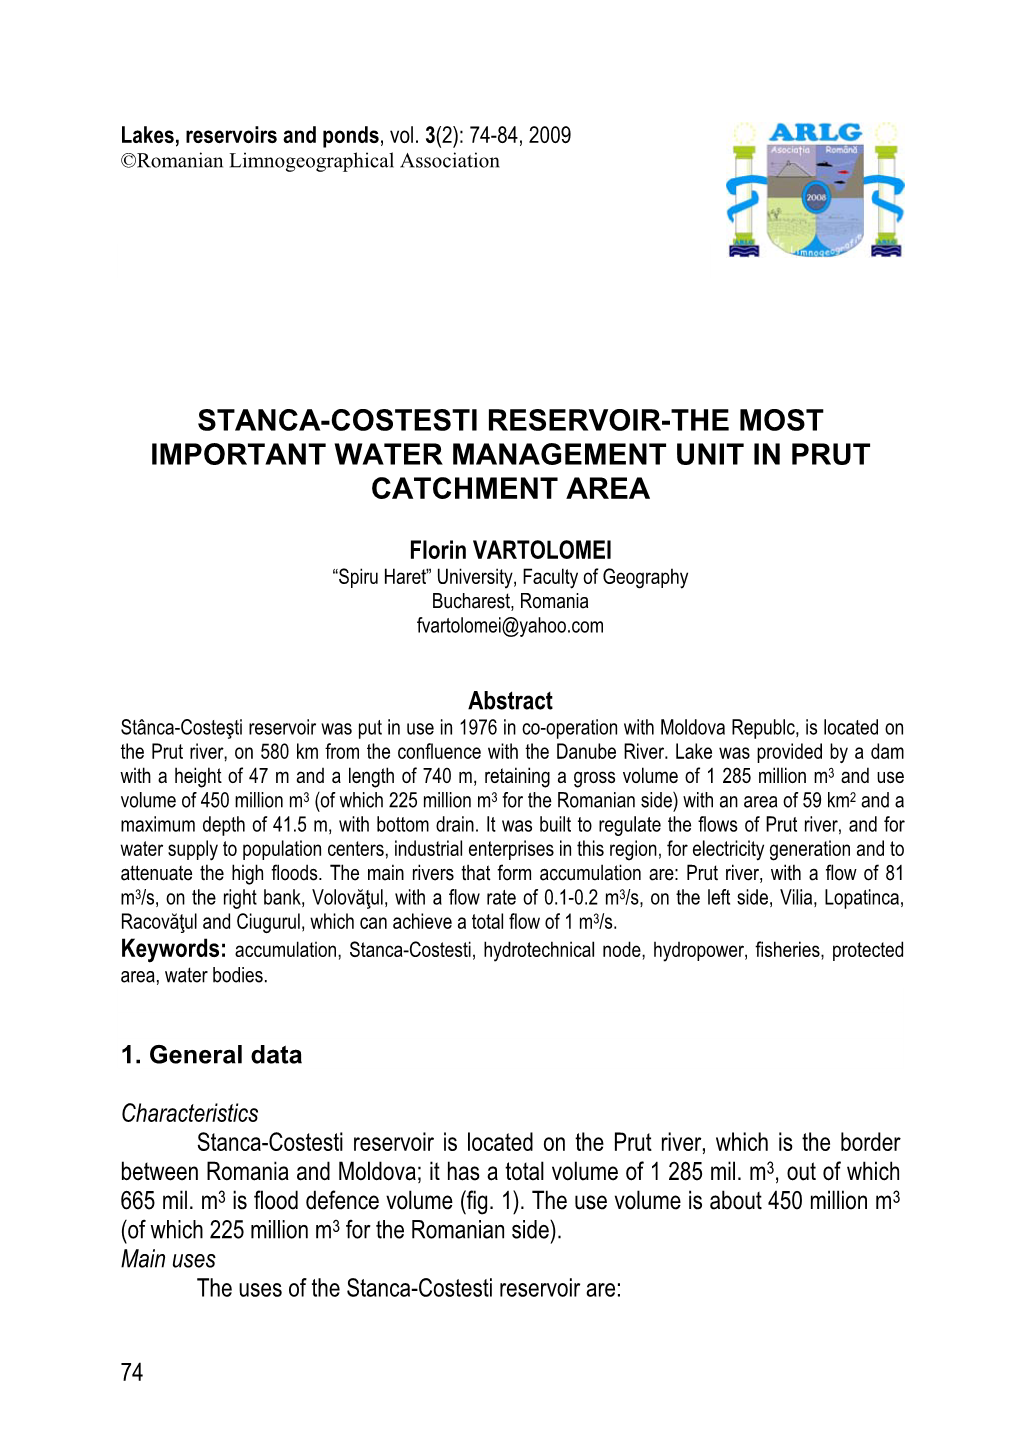 Stanca-Costesti Reservoir-The Most Important Water Management Unit in Prut Catchment Area